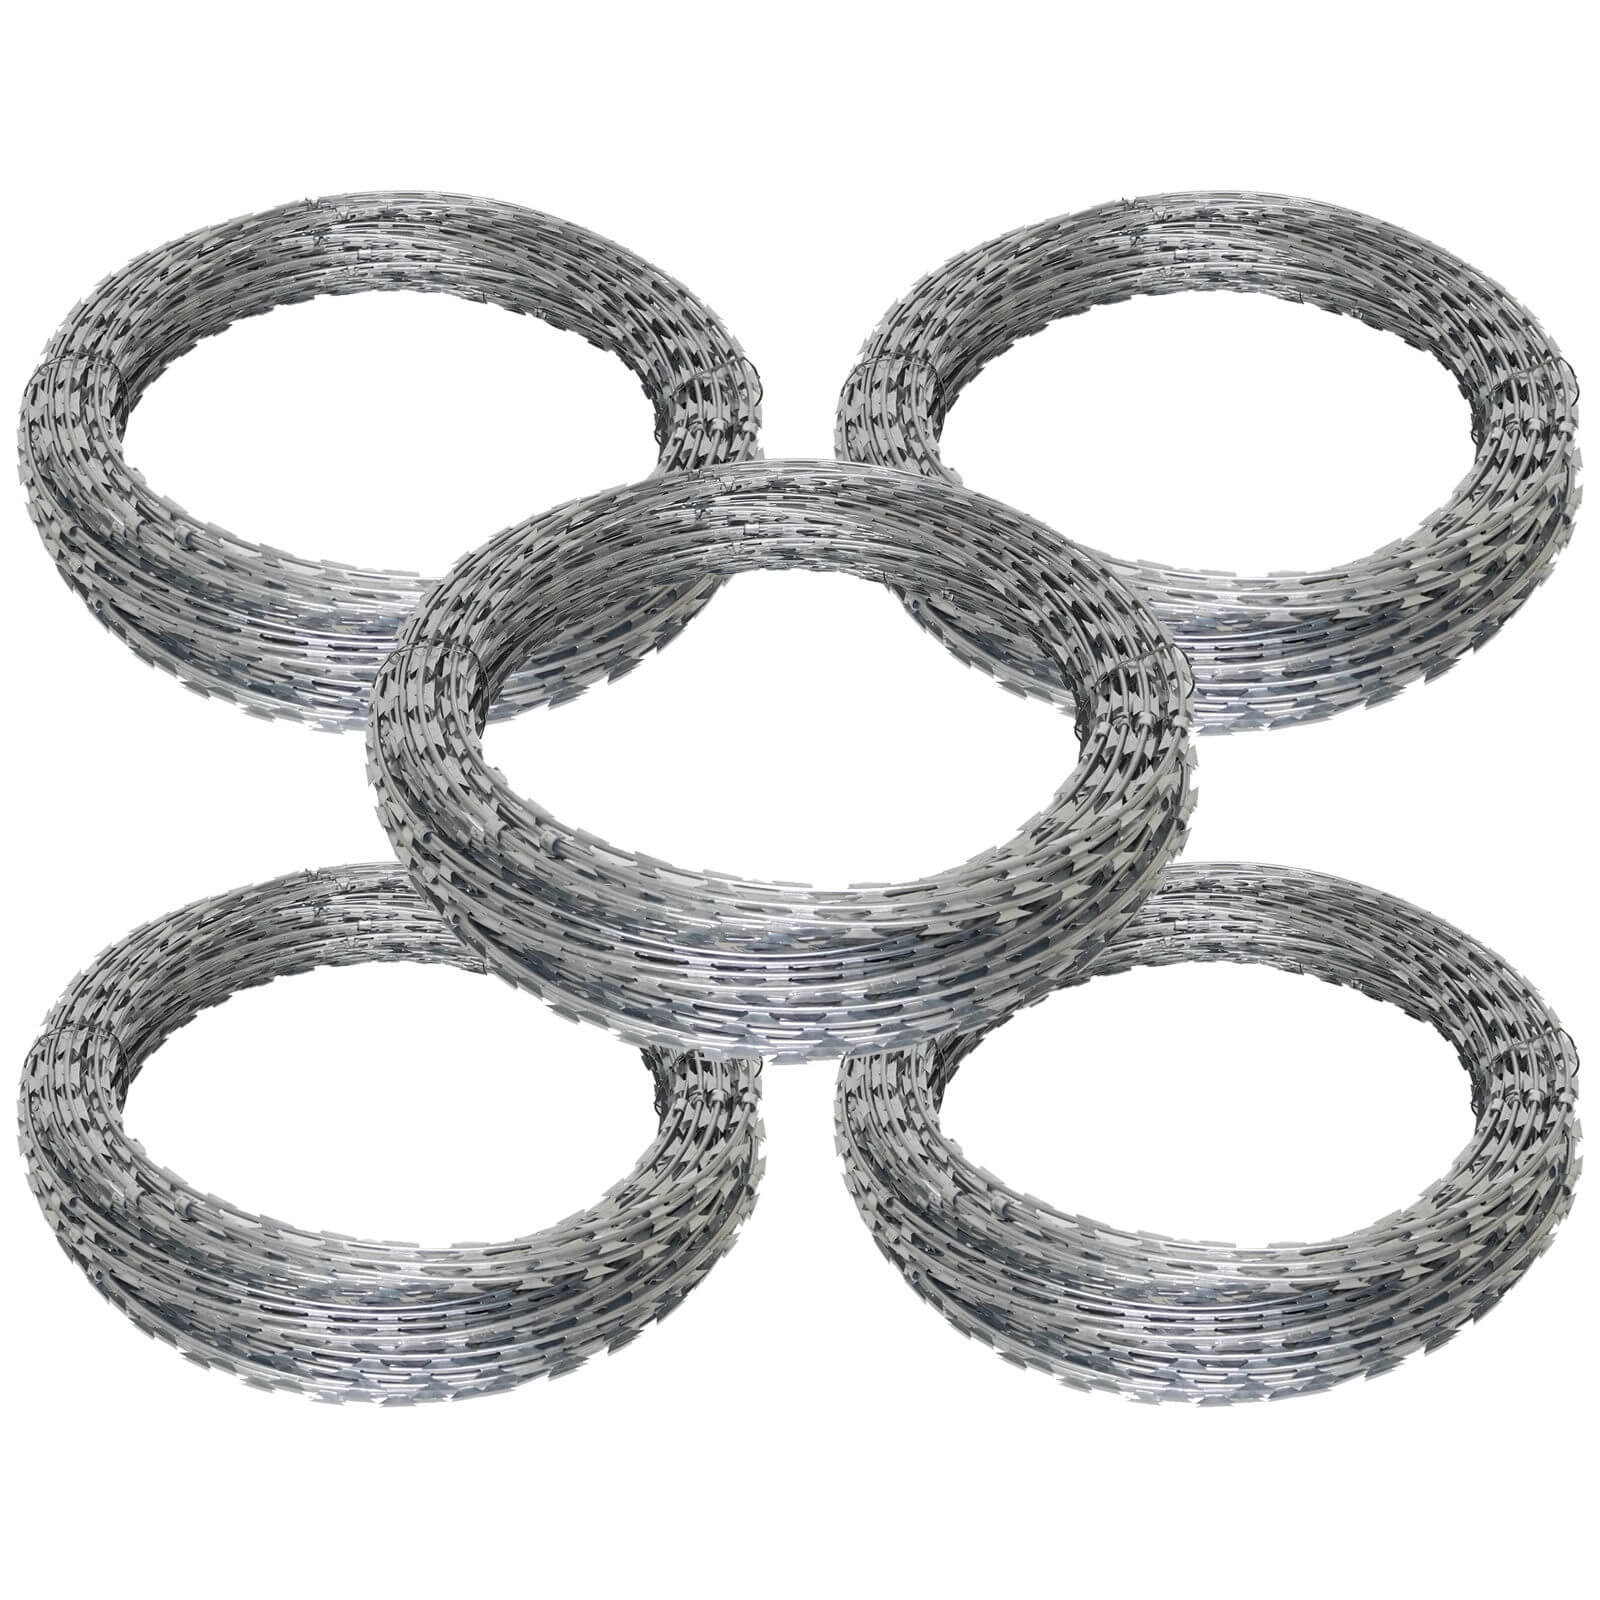 Opt for razor wire fencing for maximum protection